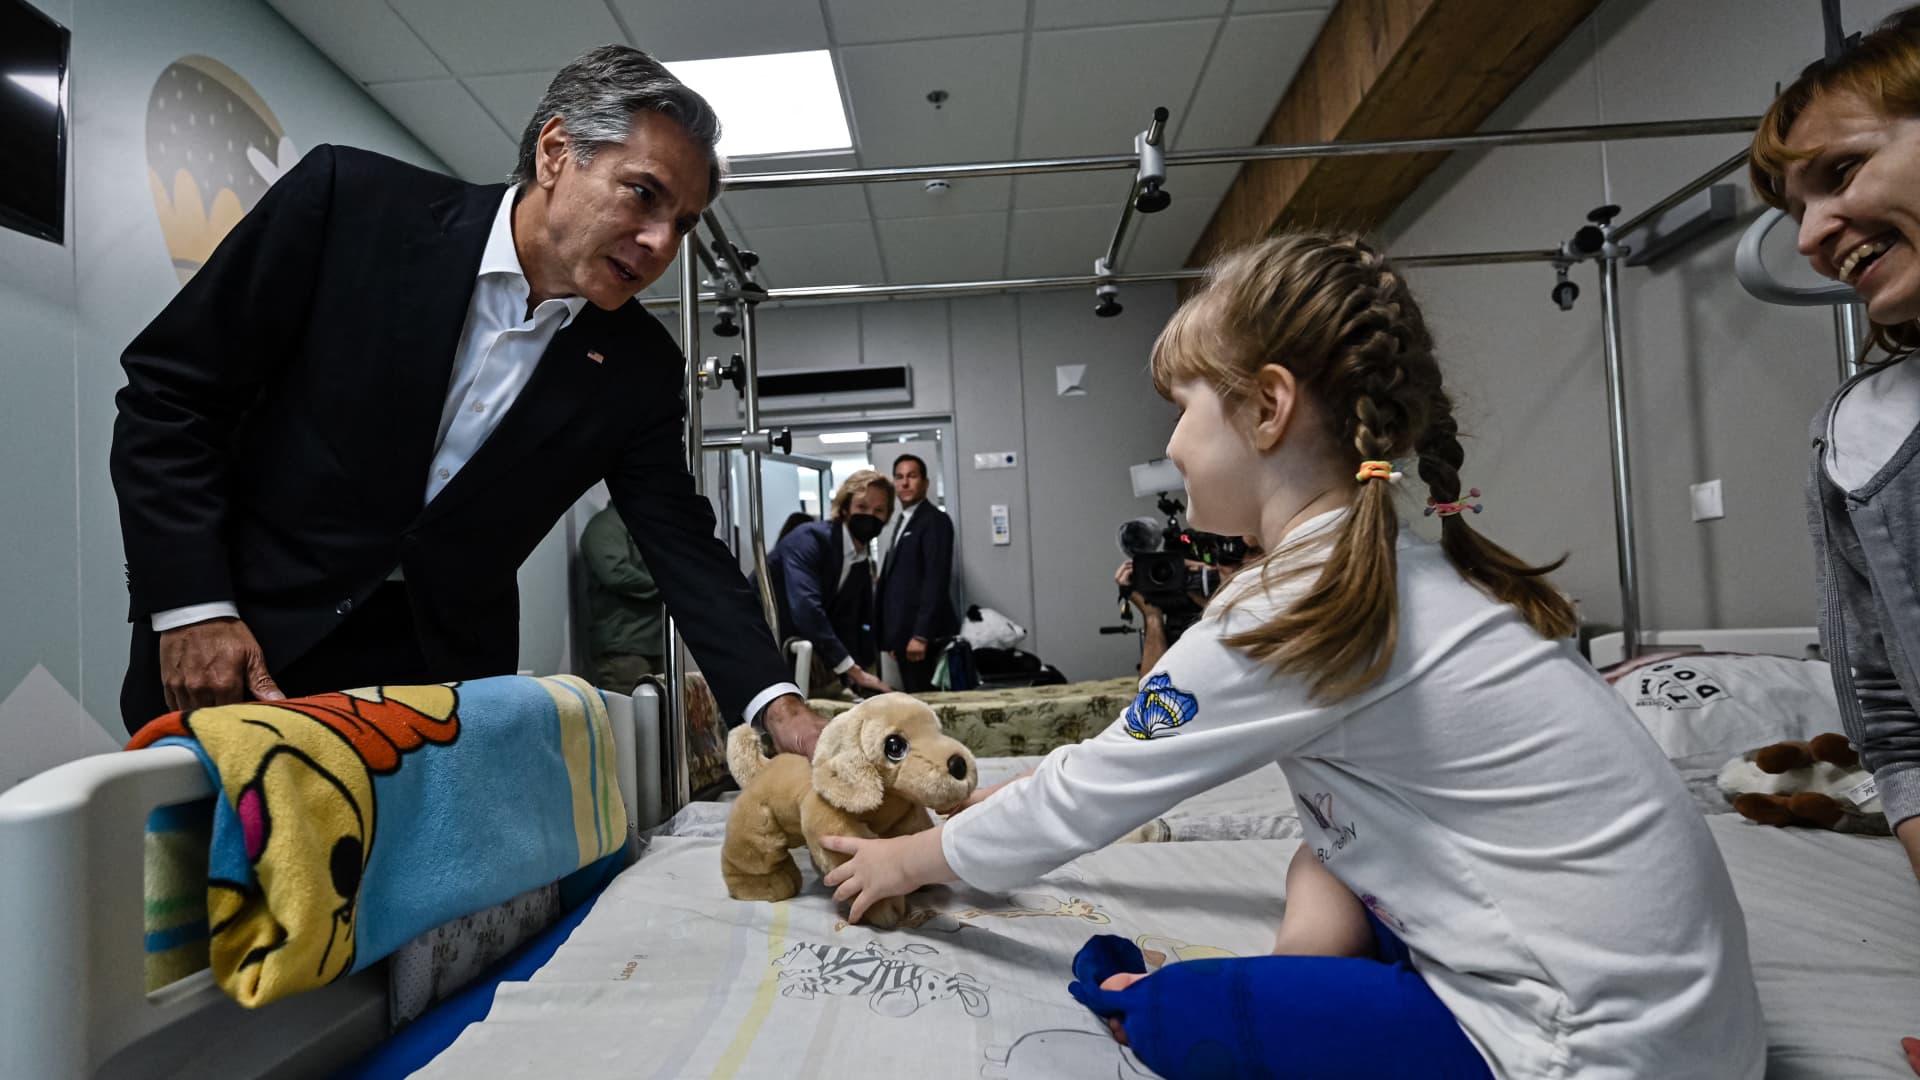 US' Secretary of State Antony Blinken gives a gift to Marina, 6, from Kherson region, during his visit at a children's hospital in Kyiv on September 8, 2022.